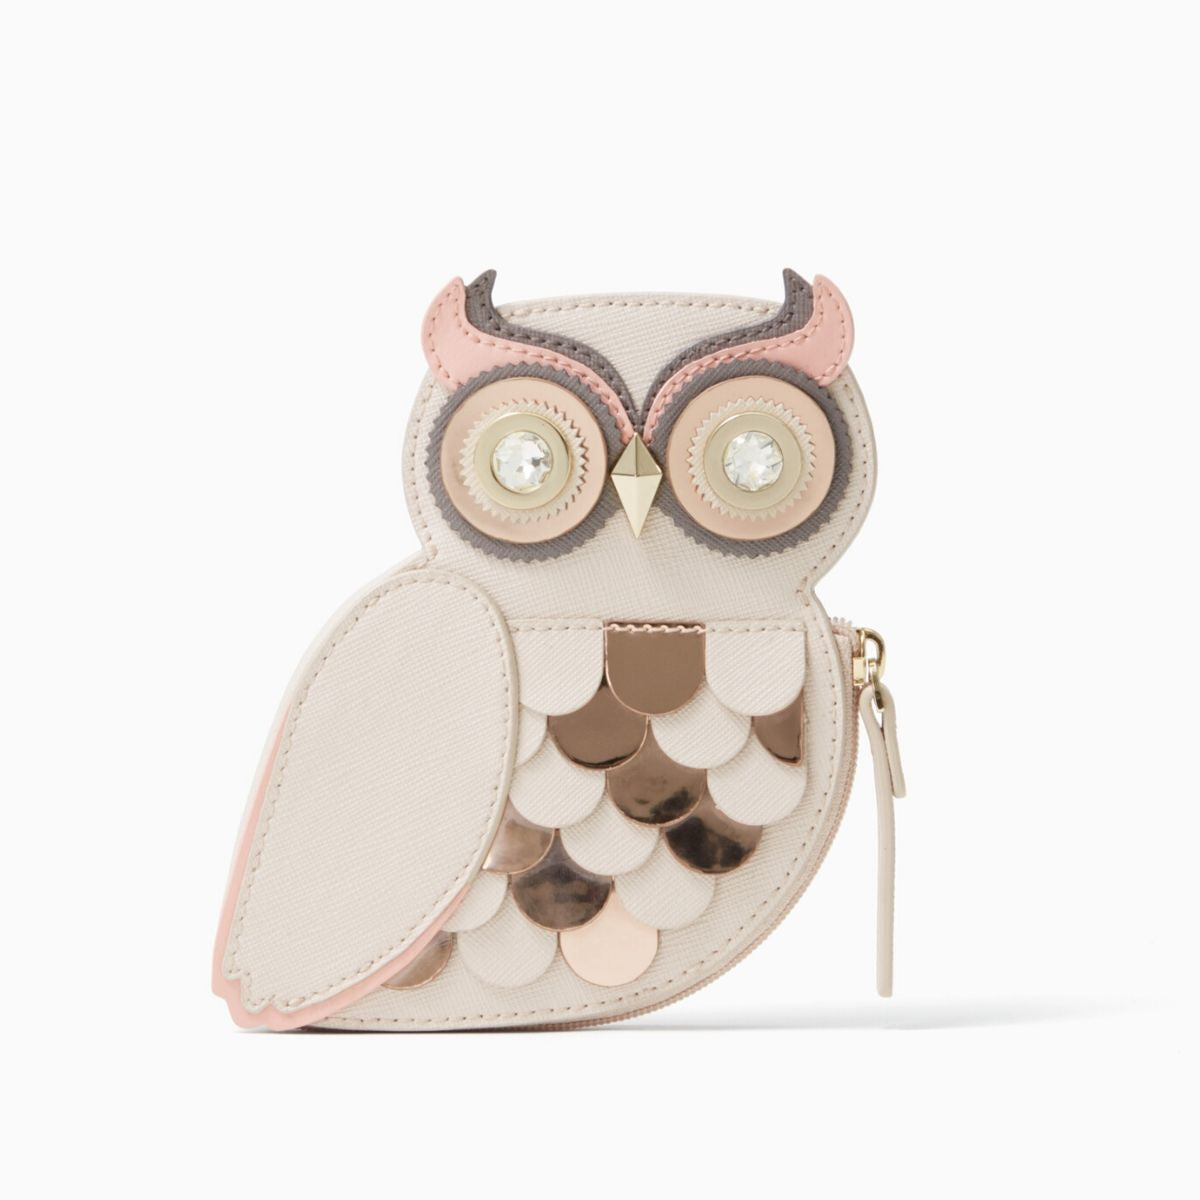 Kate Spade New York 'Wise Owl' Coin Purse